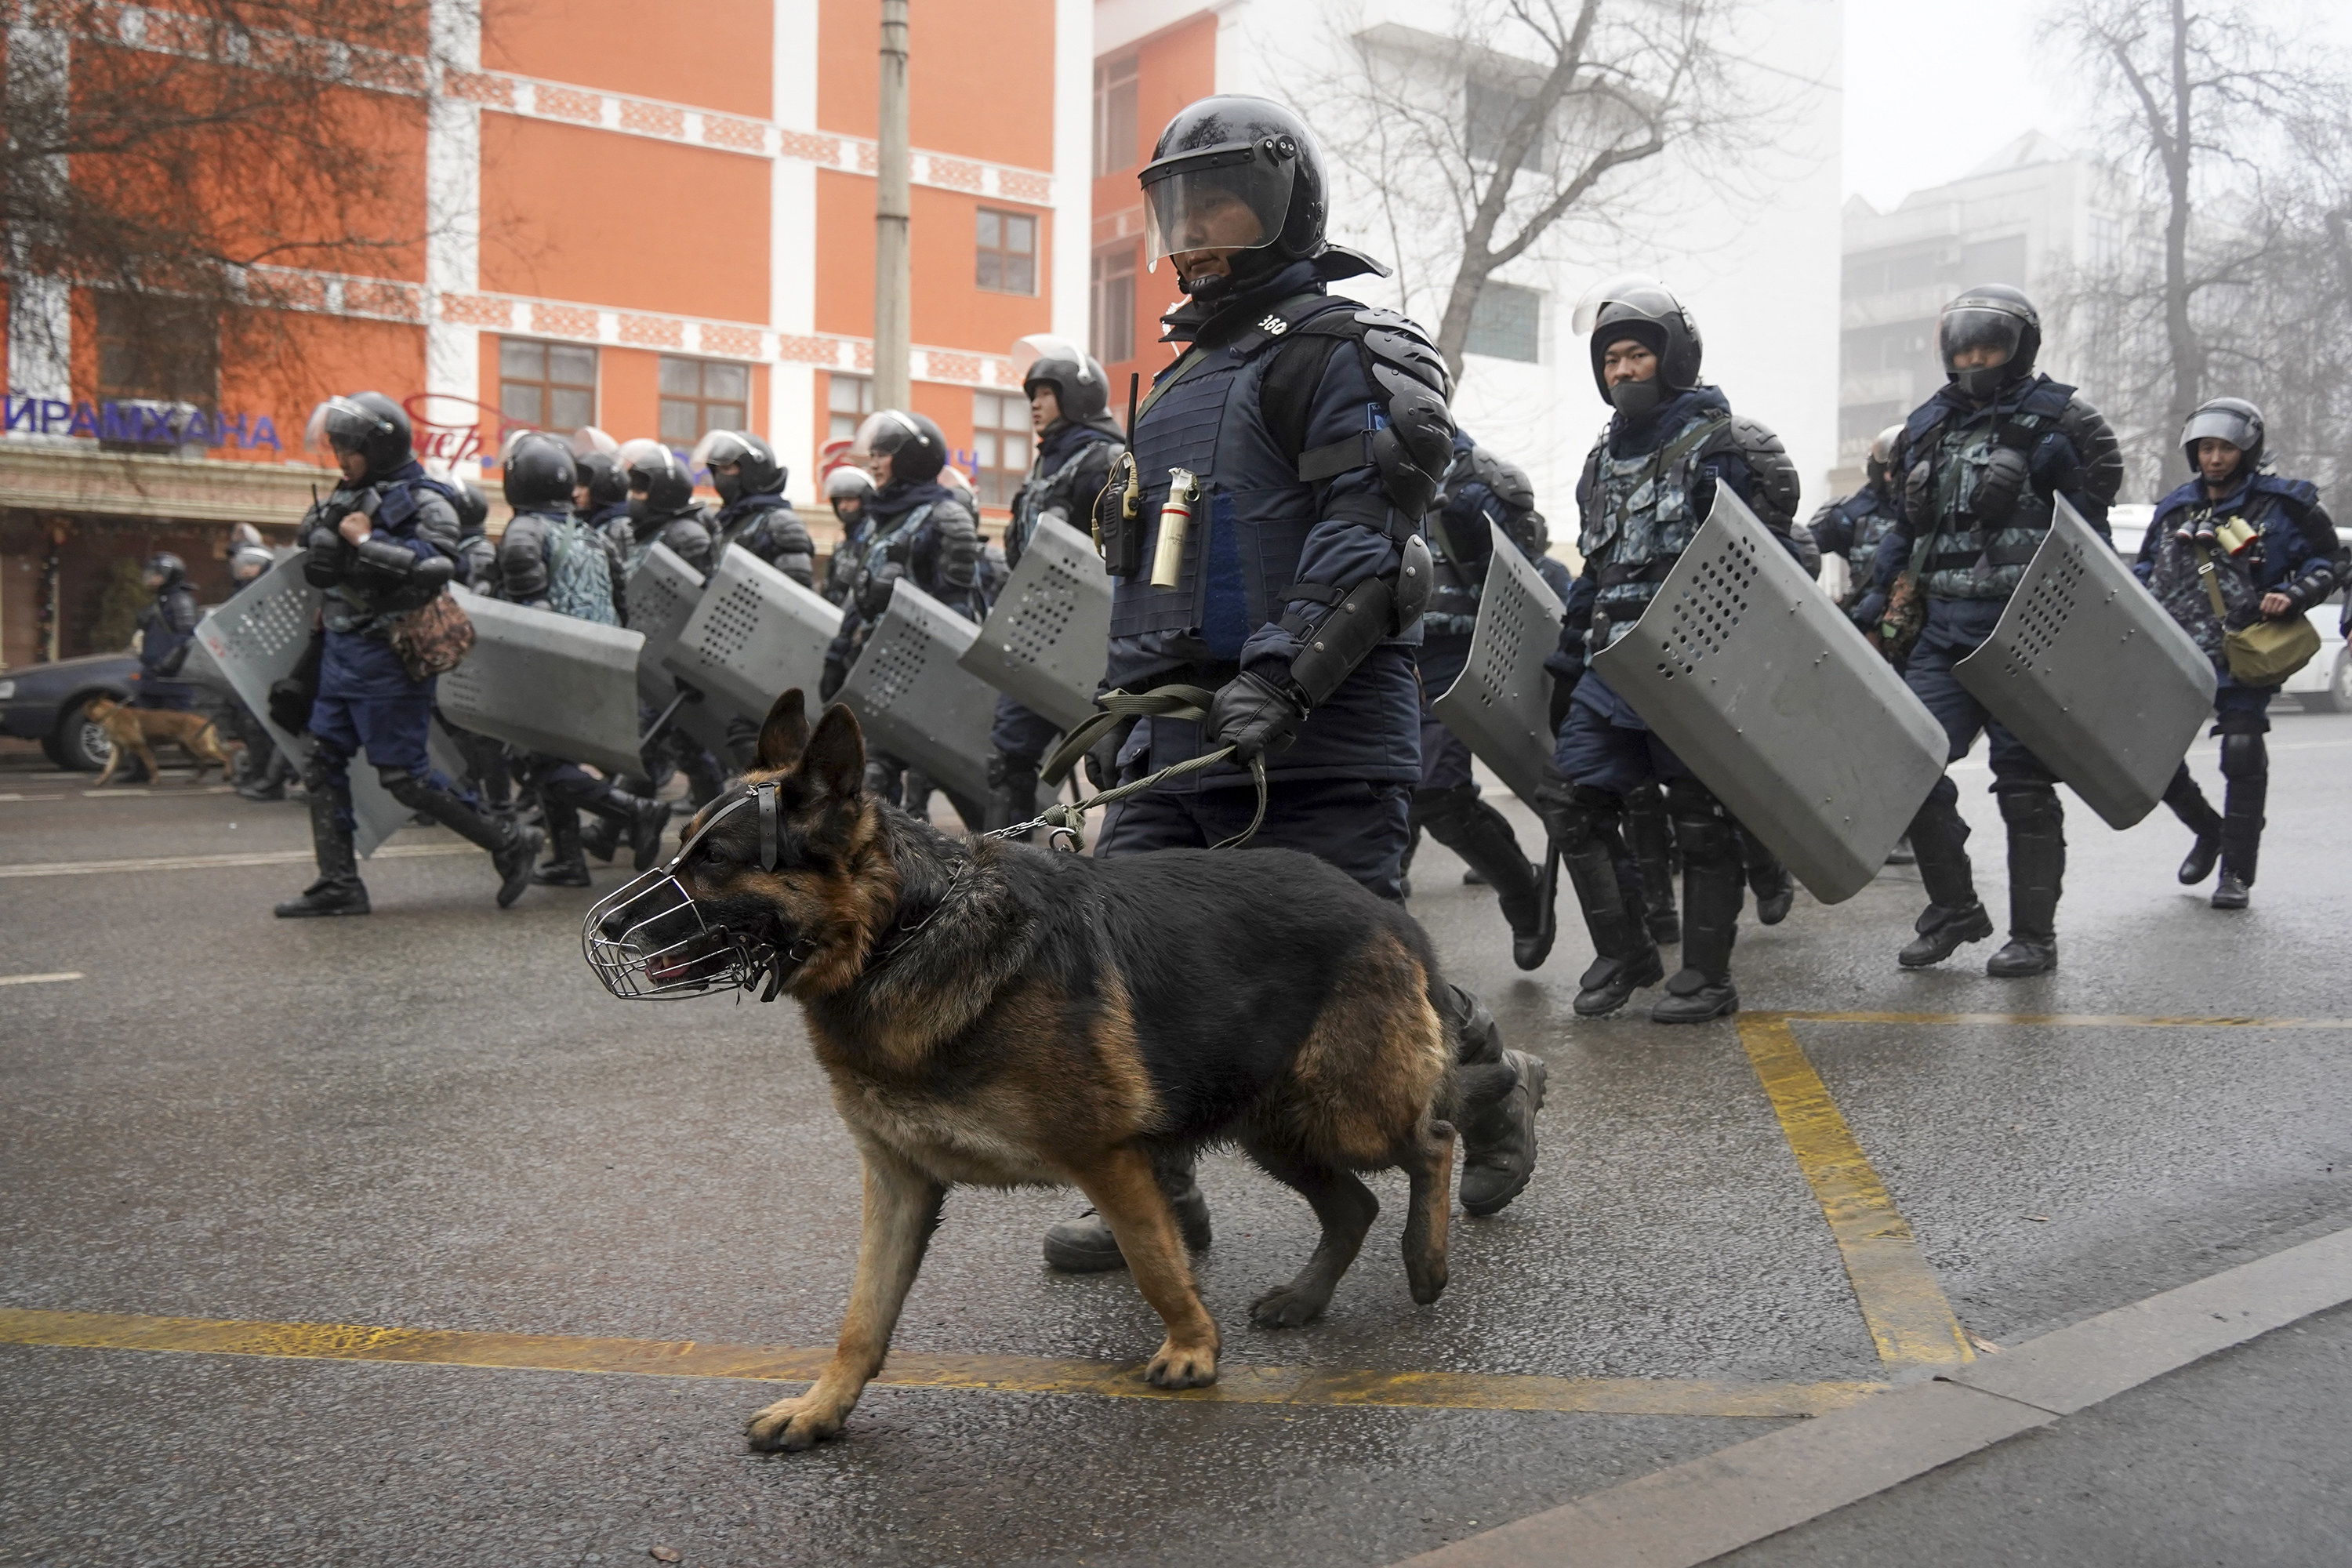 Police, one with a very large dog on a leash and muzzled, march in riot gear and carry shields